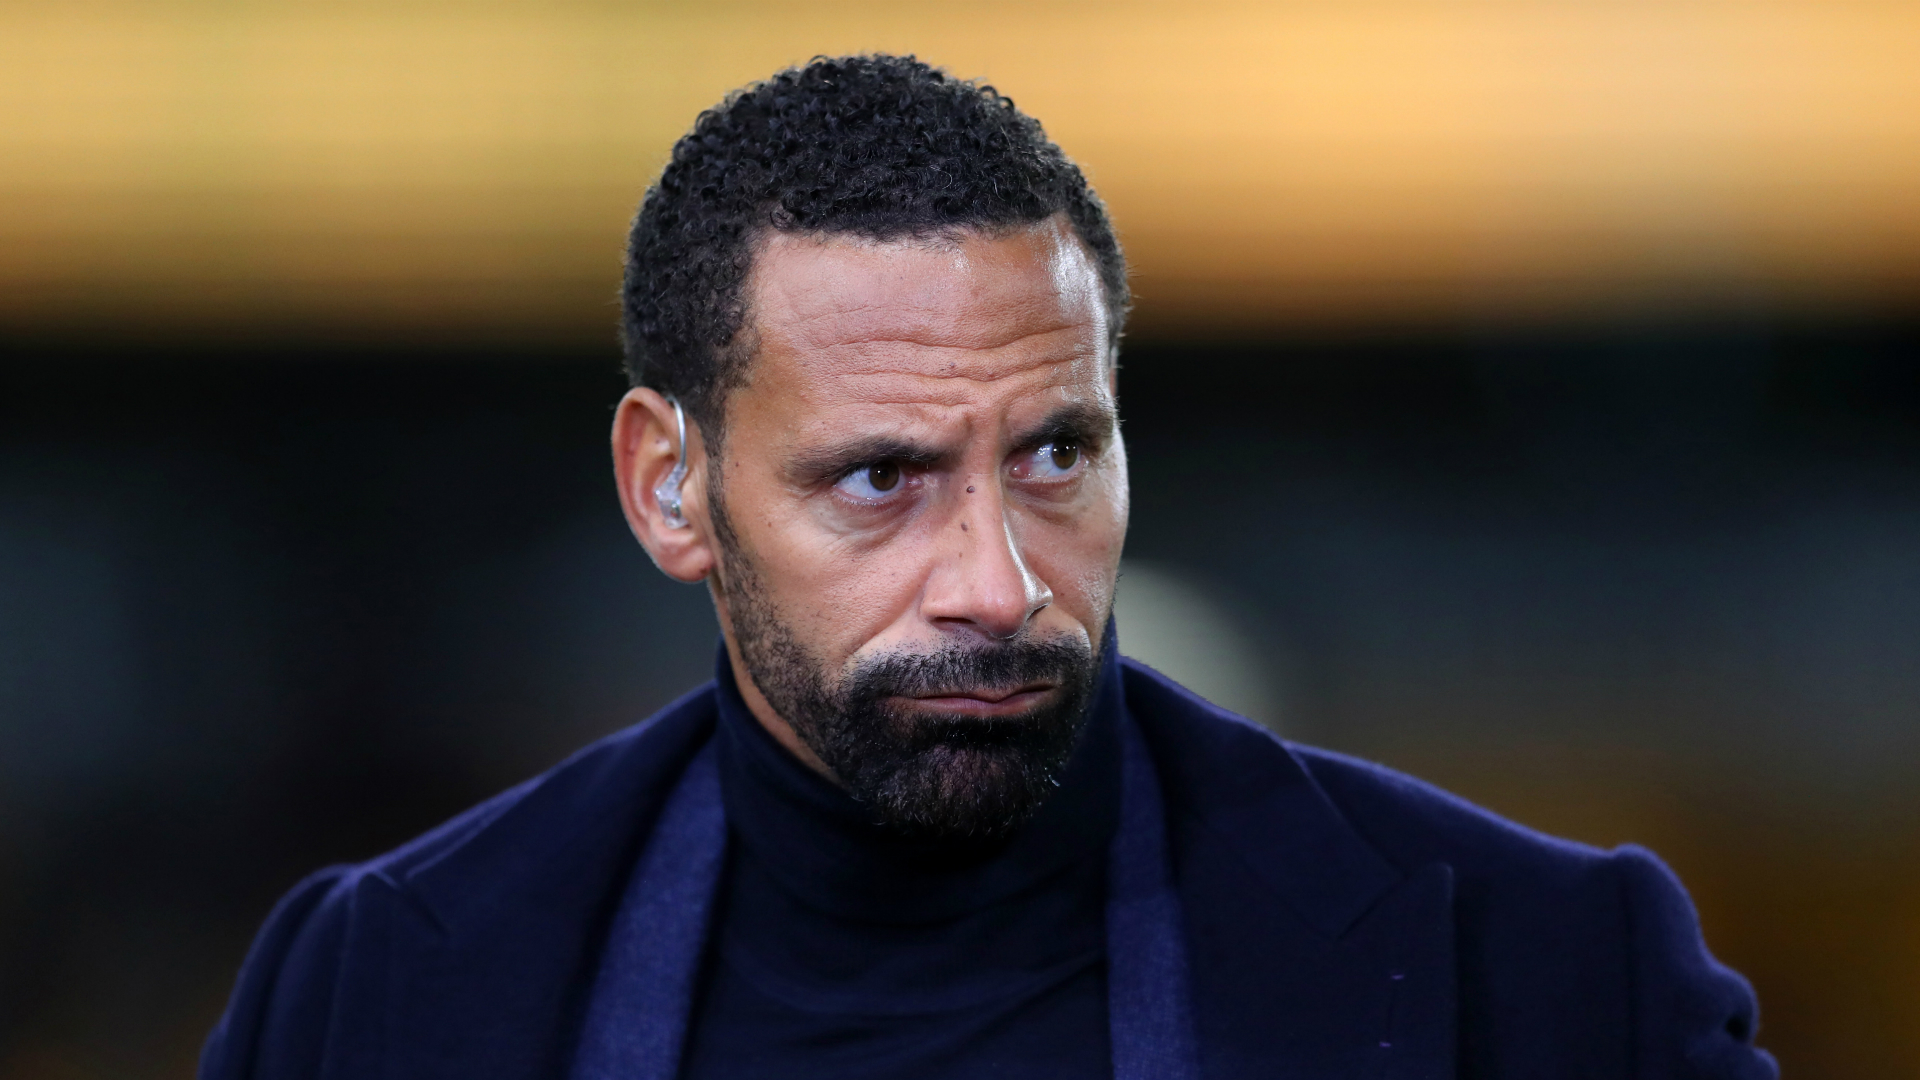 Ex-Manchester United defender Rio Ferdinand ripped into his former employers following another poor Premier League performance.